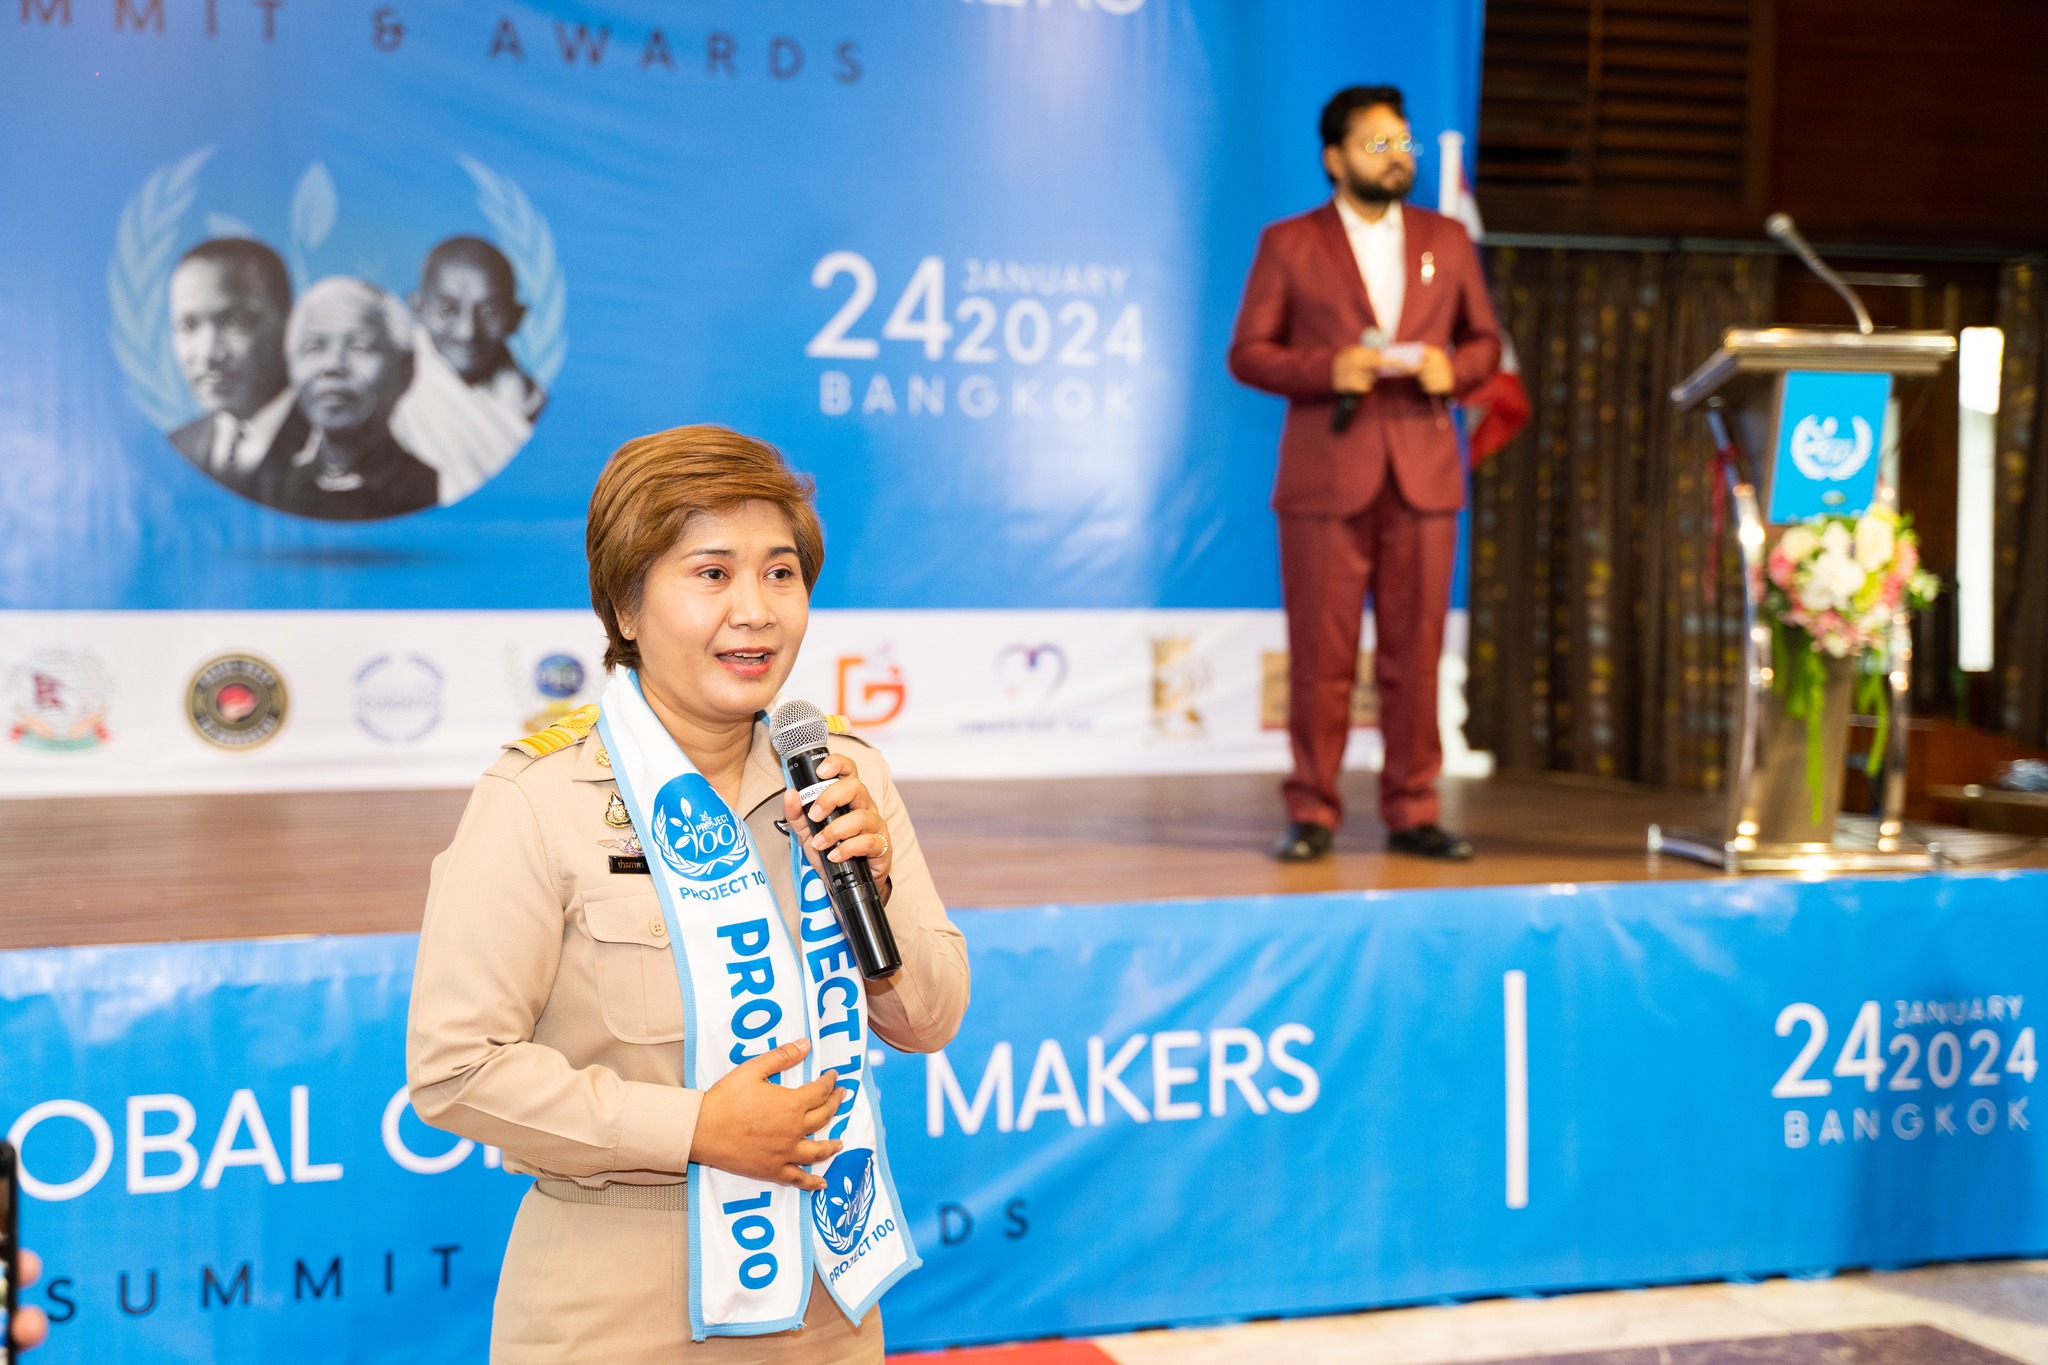 Dr. Praphaporn Chantrasmi, Director of International Cooperation Division, Office of the Prime Minister of Thailand, Leads Global Changemakers Summit in Bangkok